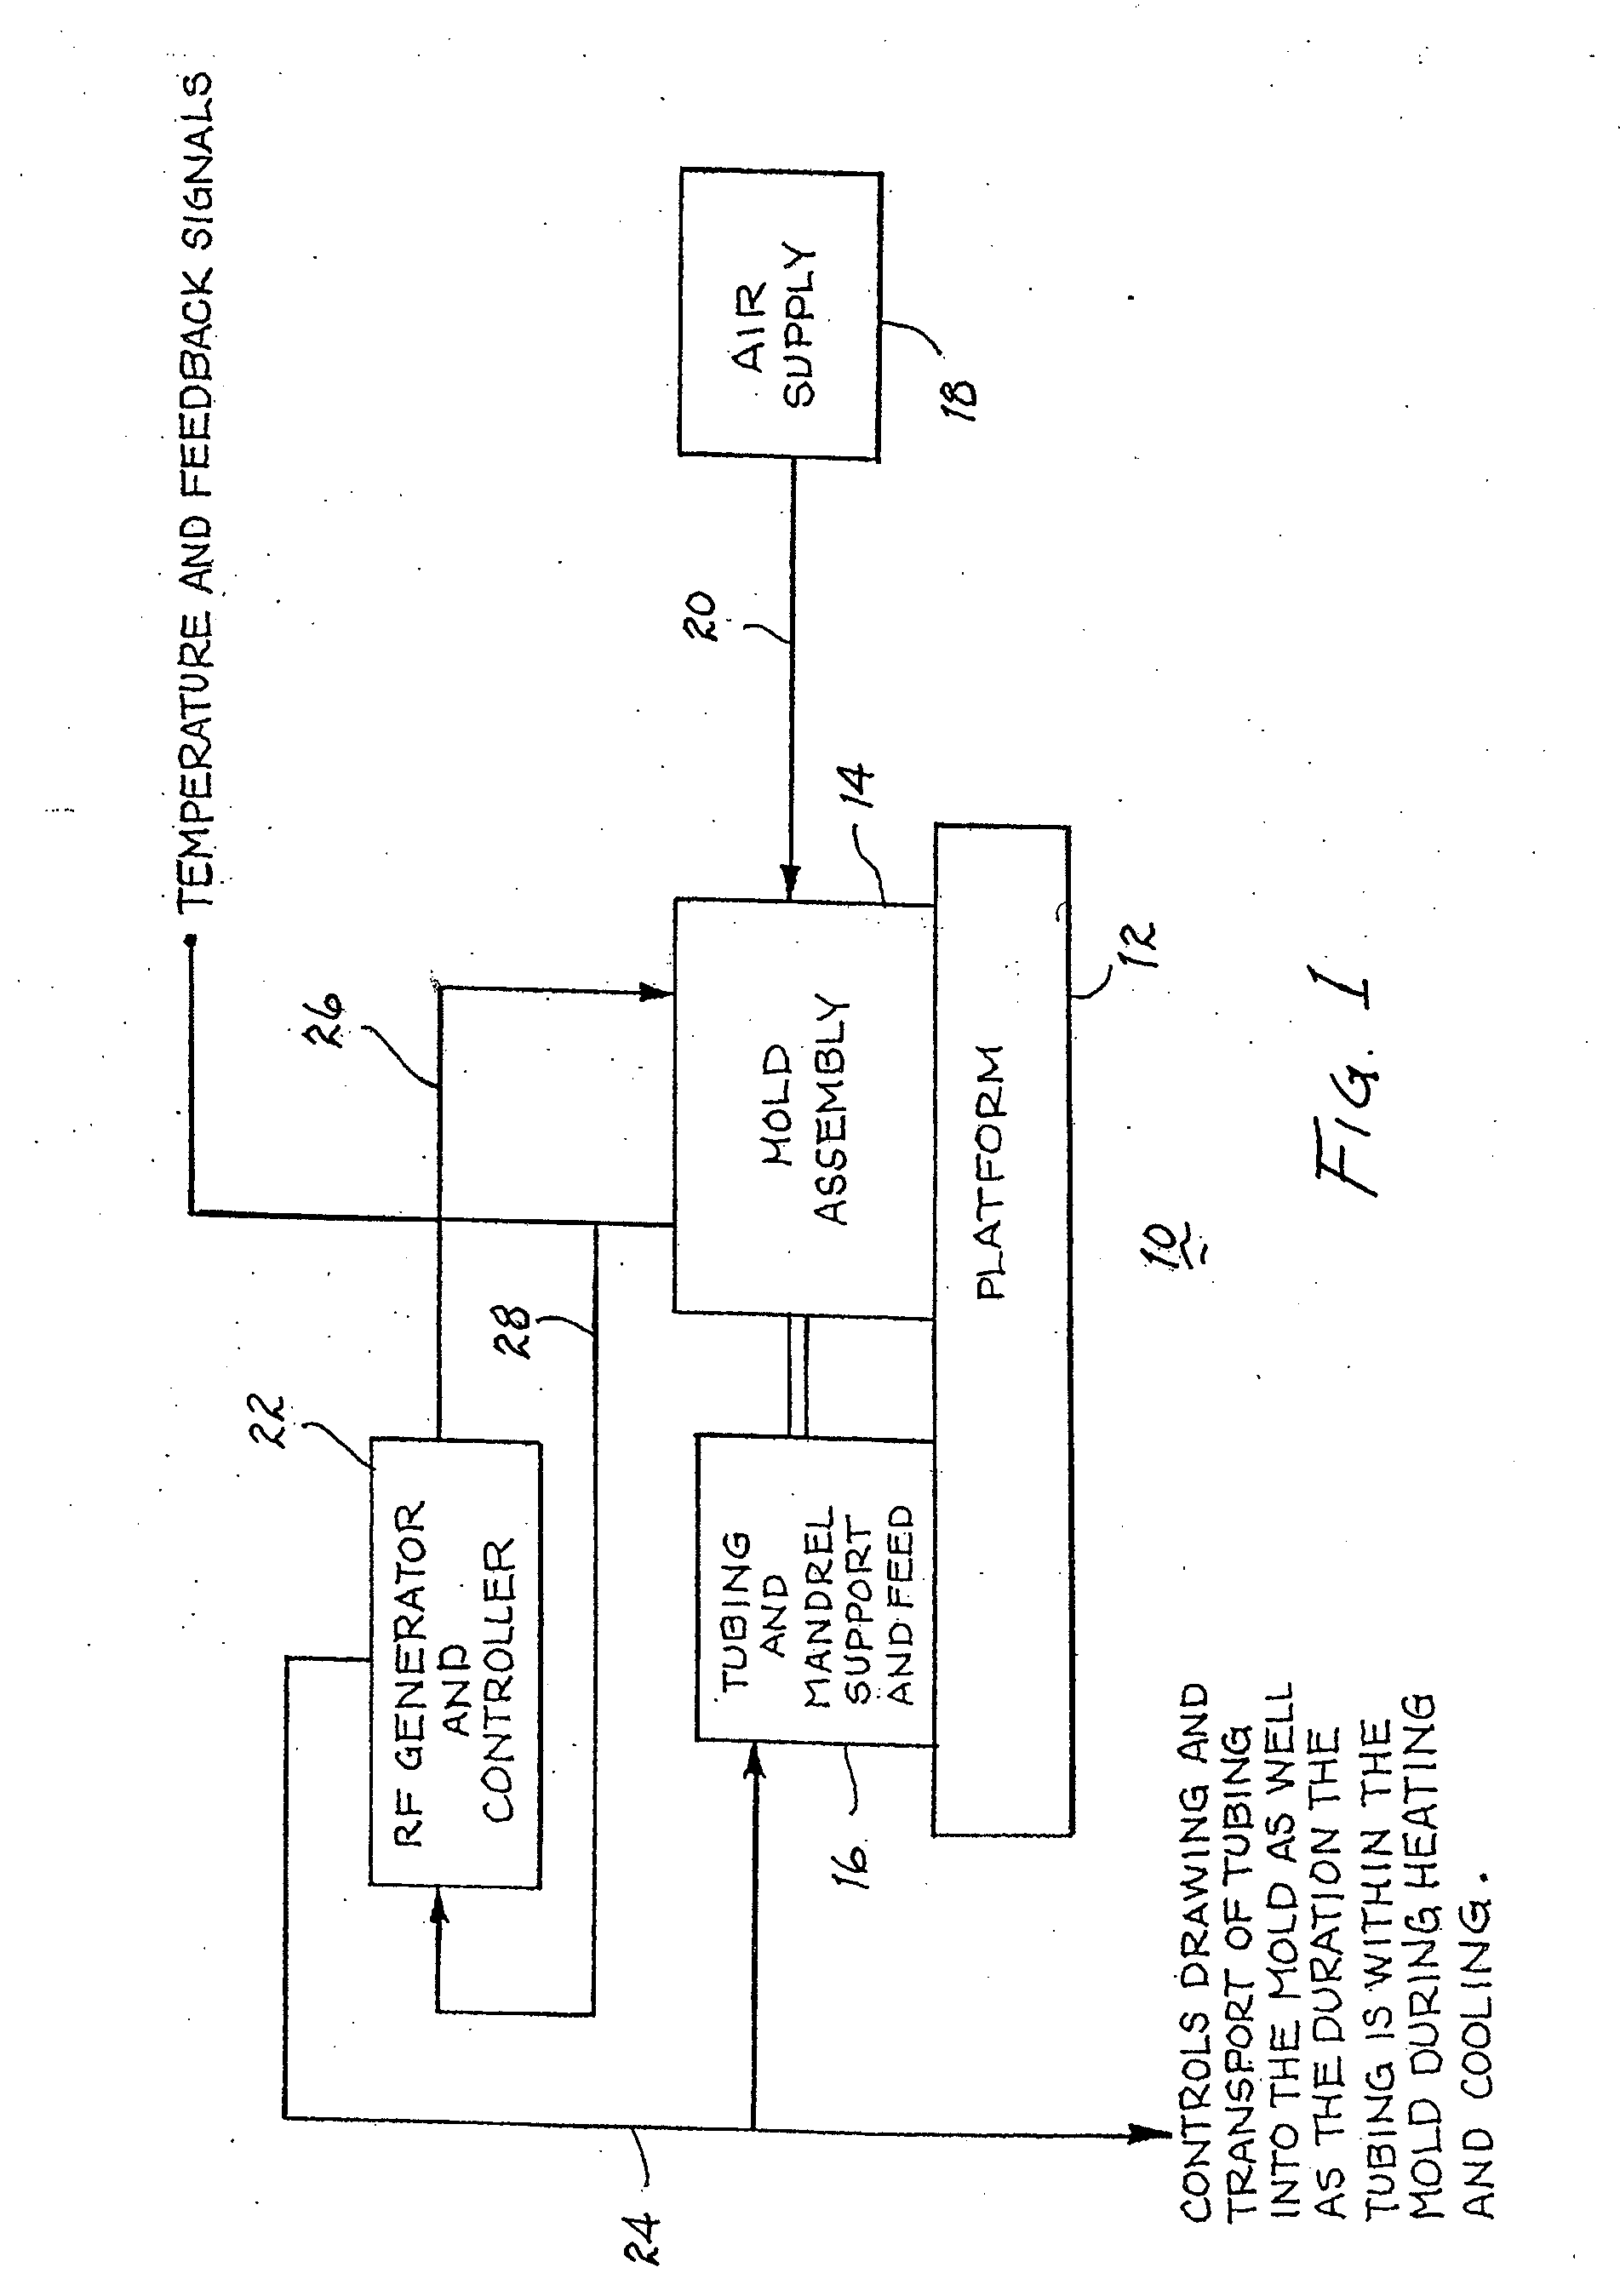 Apparatus for severing and collecting iv tubing tips